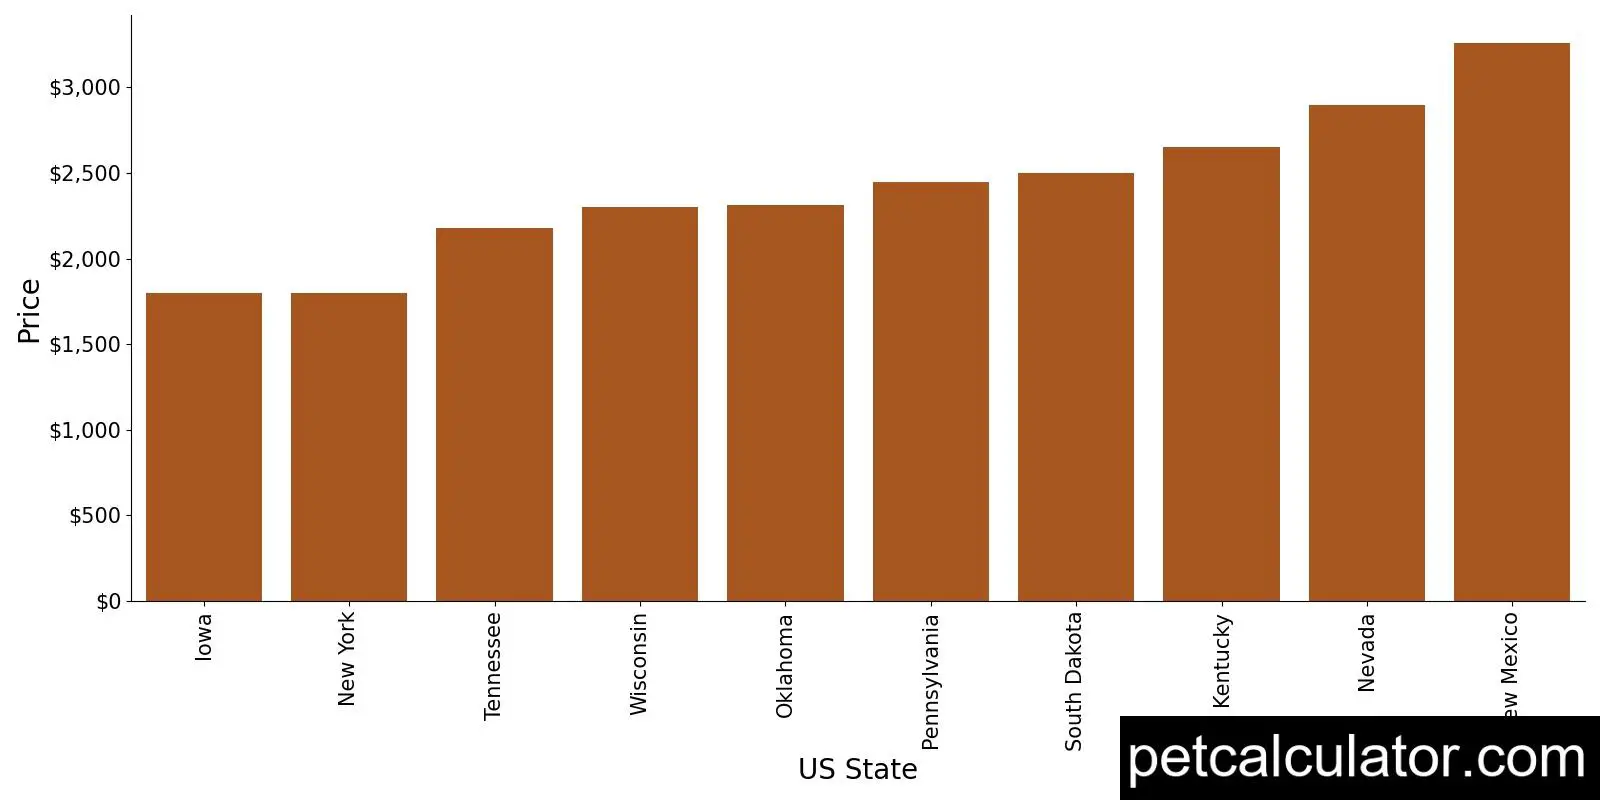 Price of Afghan Hound by US State 